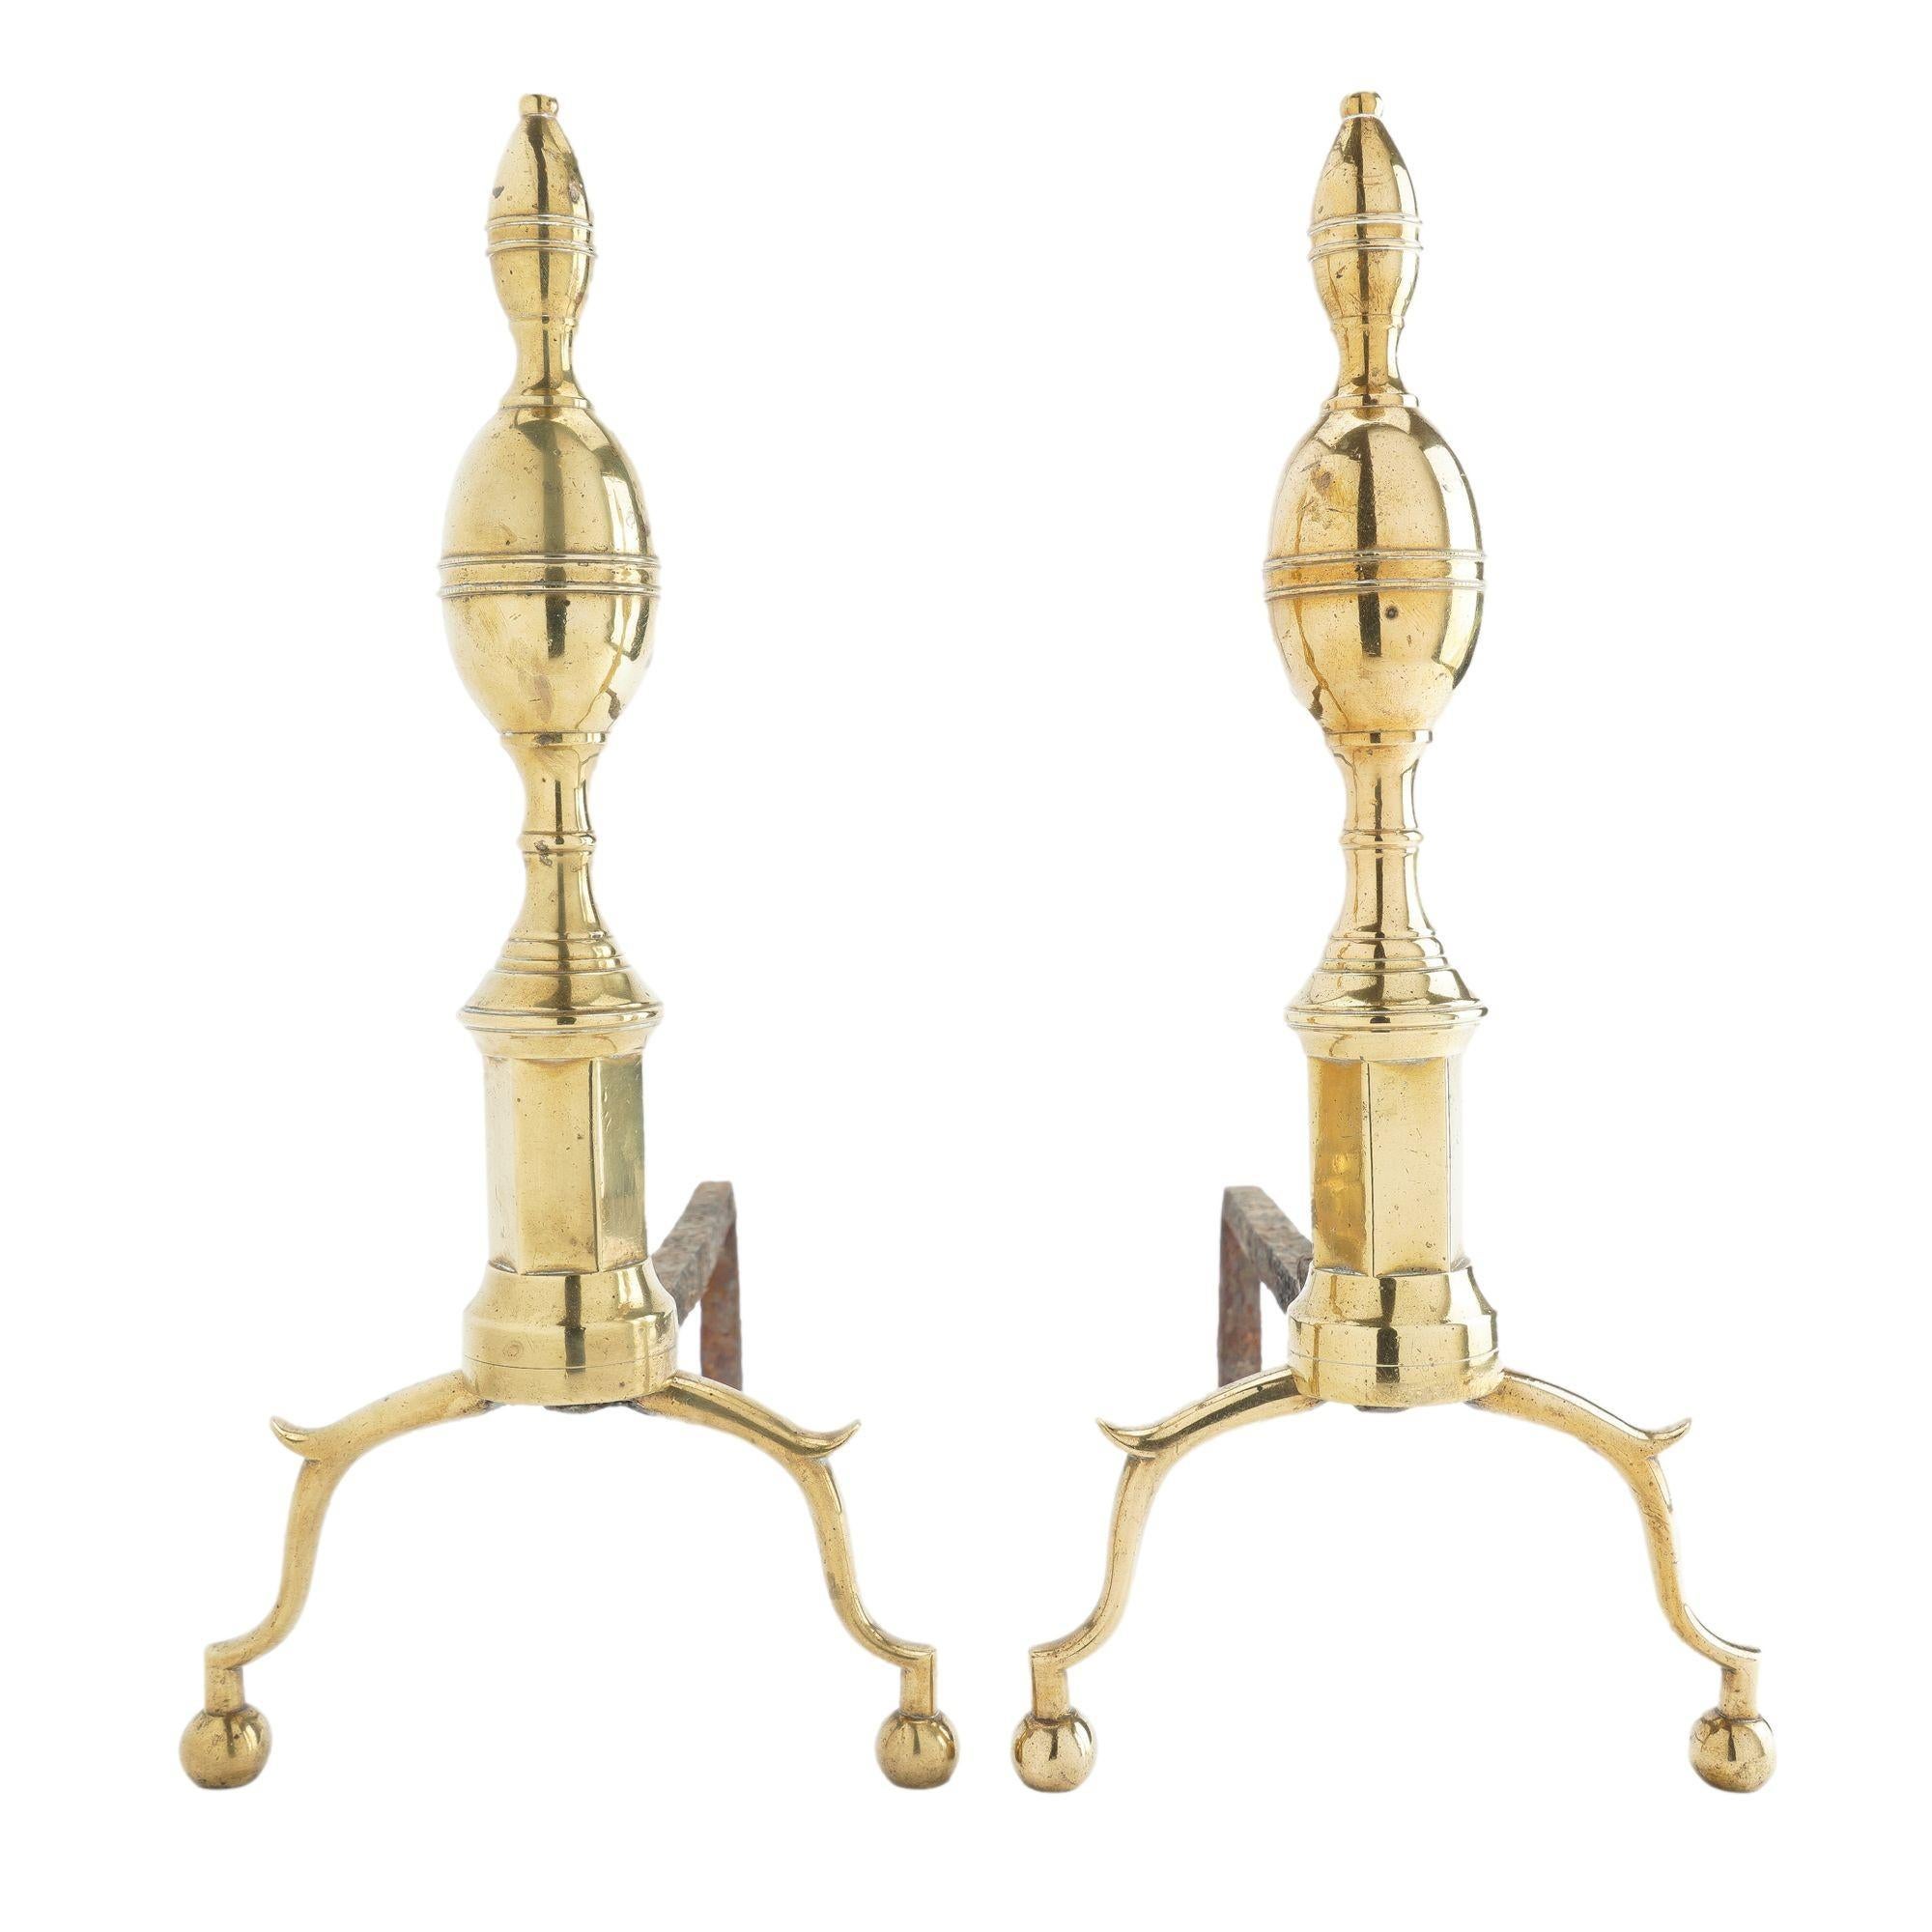 Pair of American cast brass double lemon top andirons on pillar plinth with arched, spurred legs on ball feet, and supported by a forged iron log rest.
American, Boston, circa 1790.